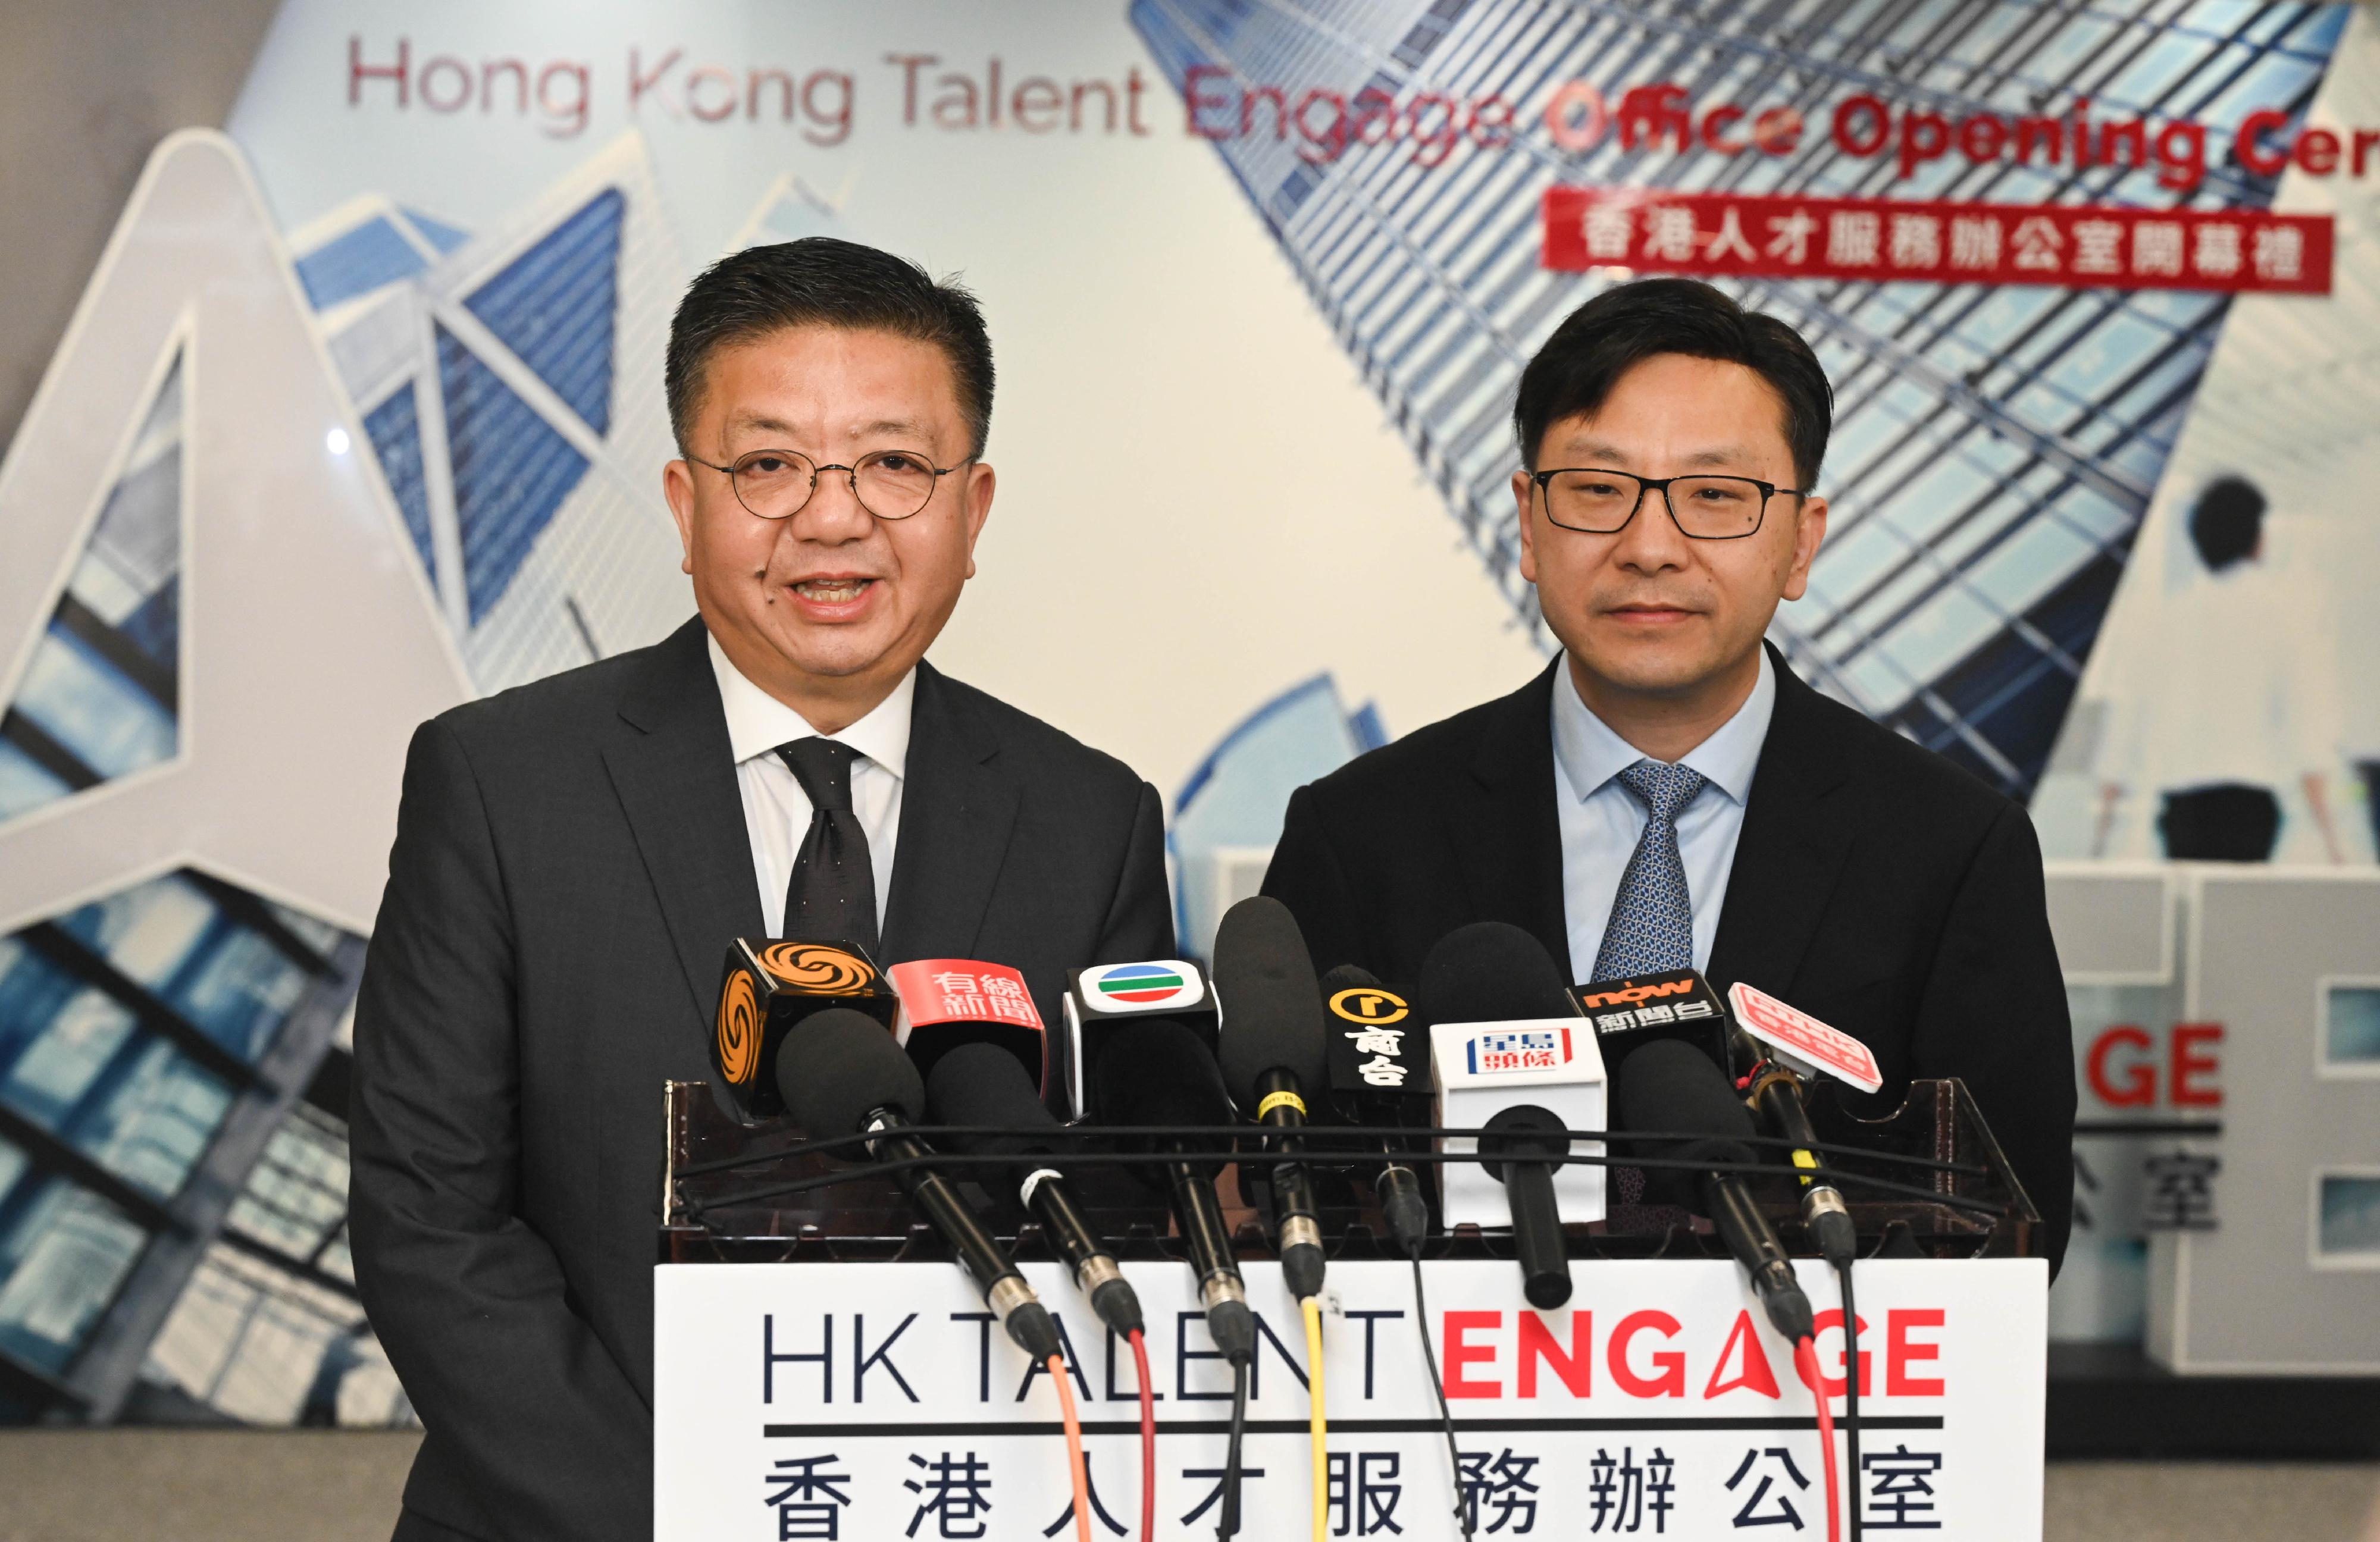 The Chief Secretary for Administration, Mr Chan Kwok-ki, today (October 30) officiated at the Hong Kong Talent Engage (HKTE) Office Opening Ceremony. Photo shows the Secretary for Labour and Welfare, Mr Chris Sun (right), and the Director of HKTE, Mr Anthony Lau (left), briefing the media on HKTE's directions of work.